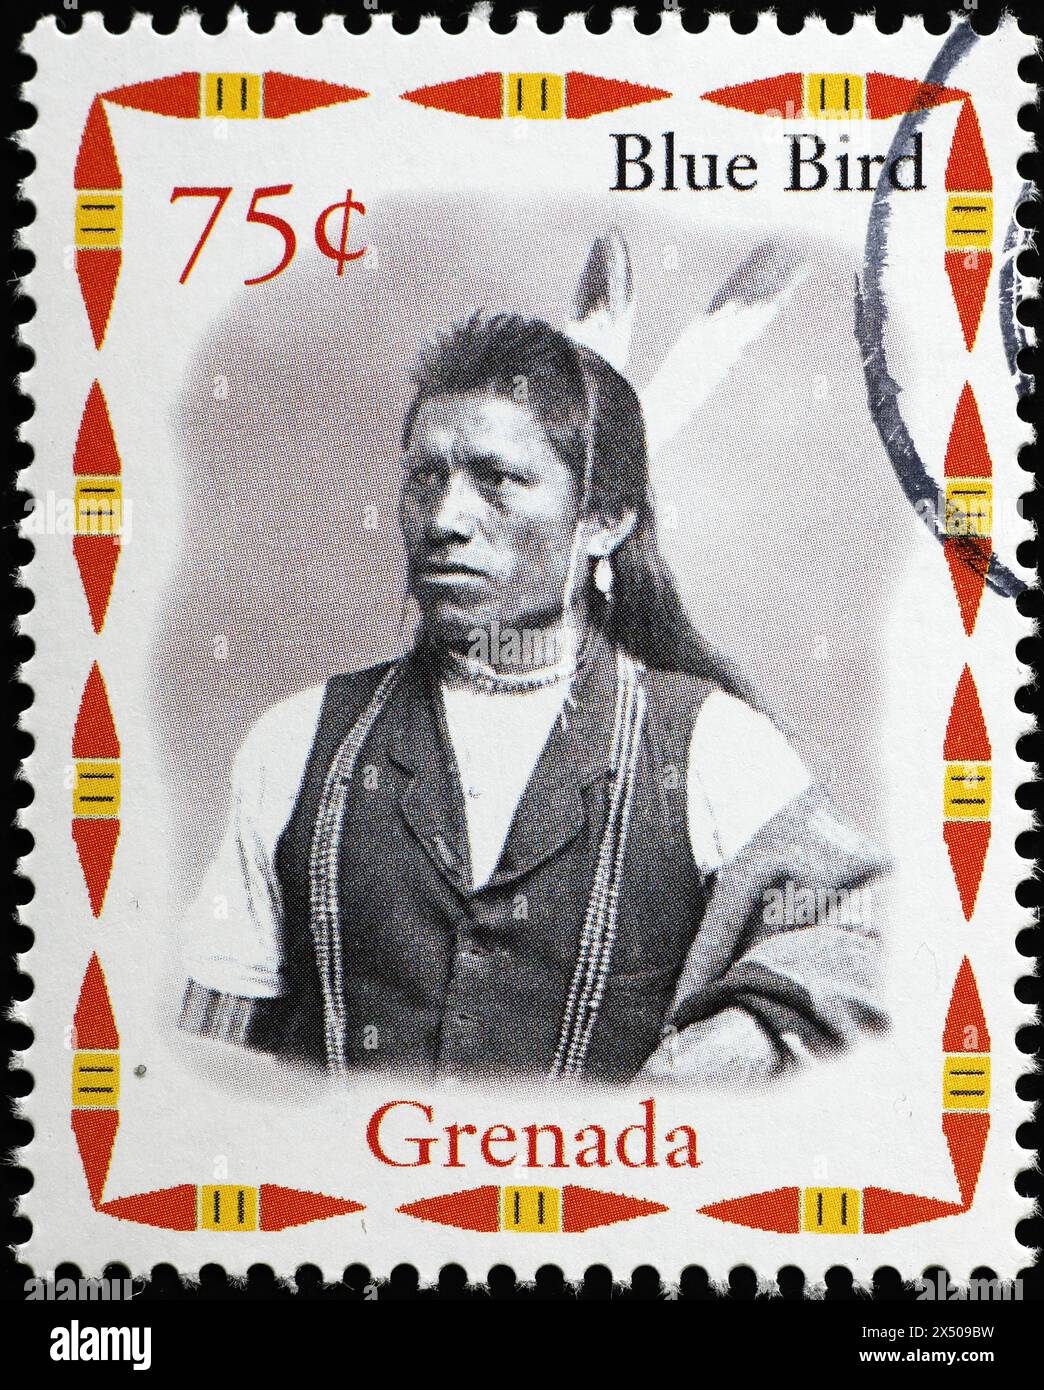 Indian chief Blue bird on stamp from Grenada Stock Photo